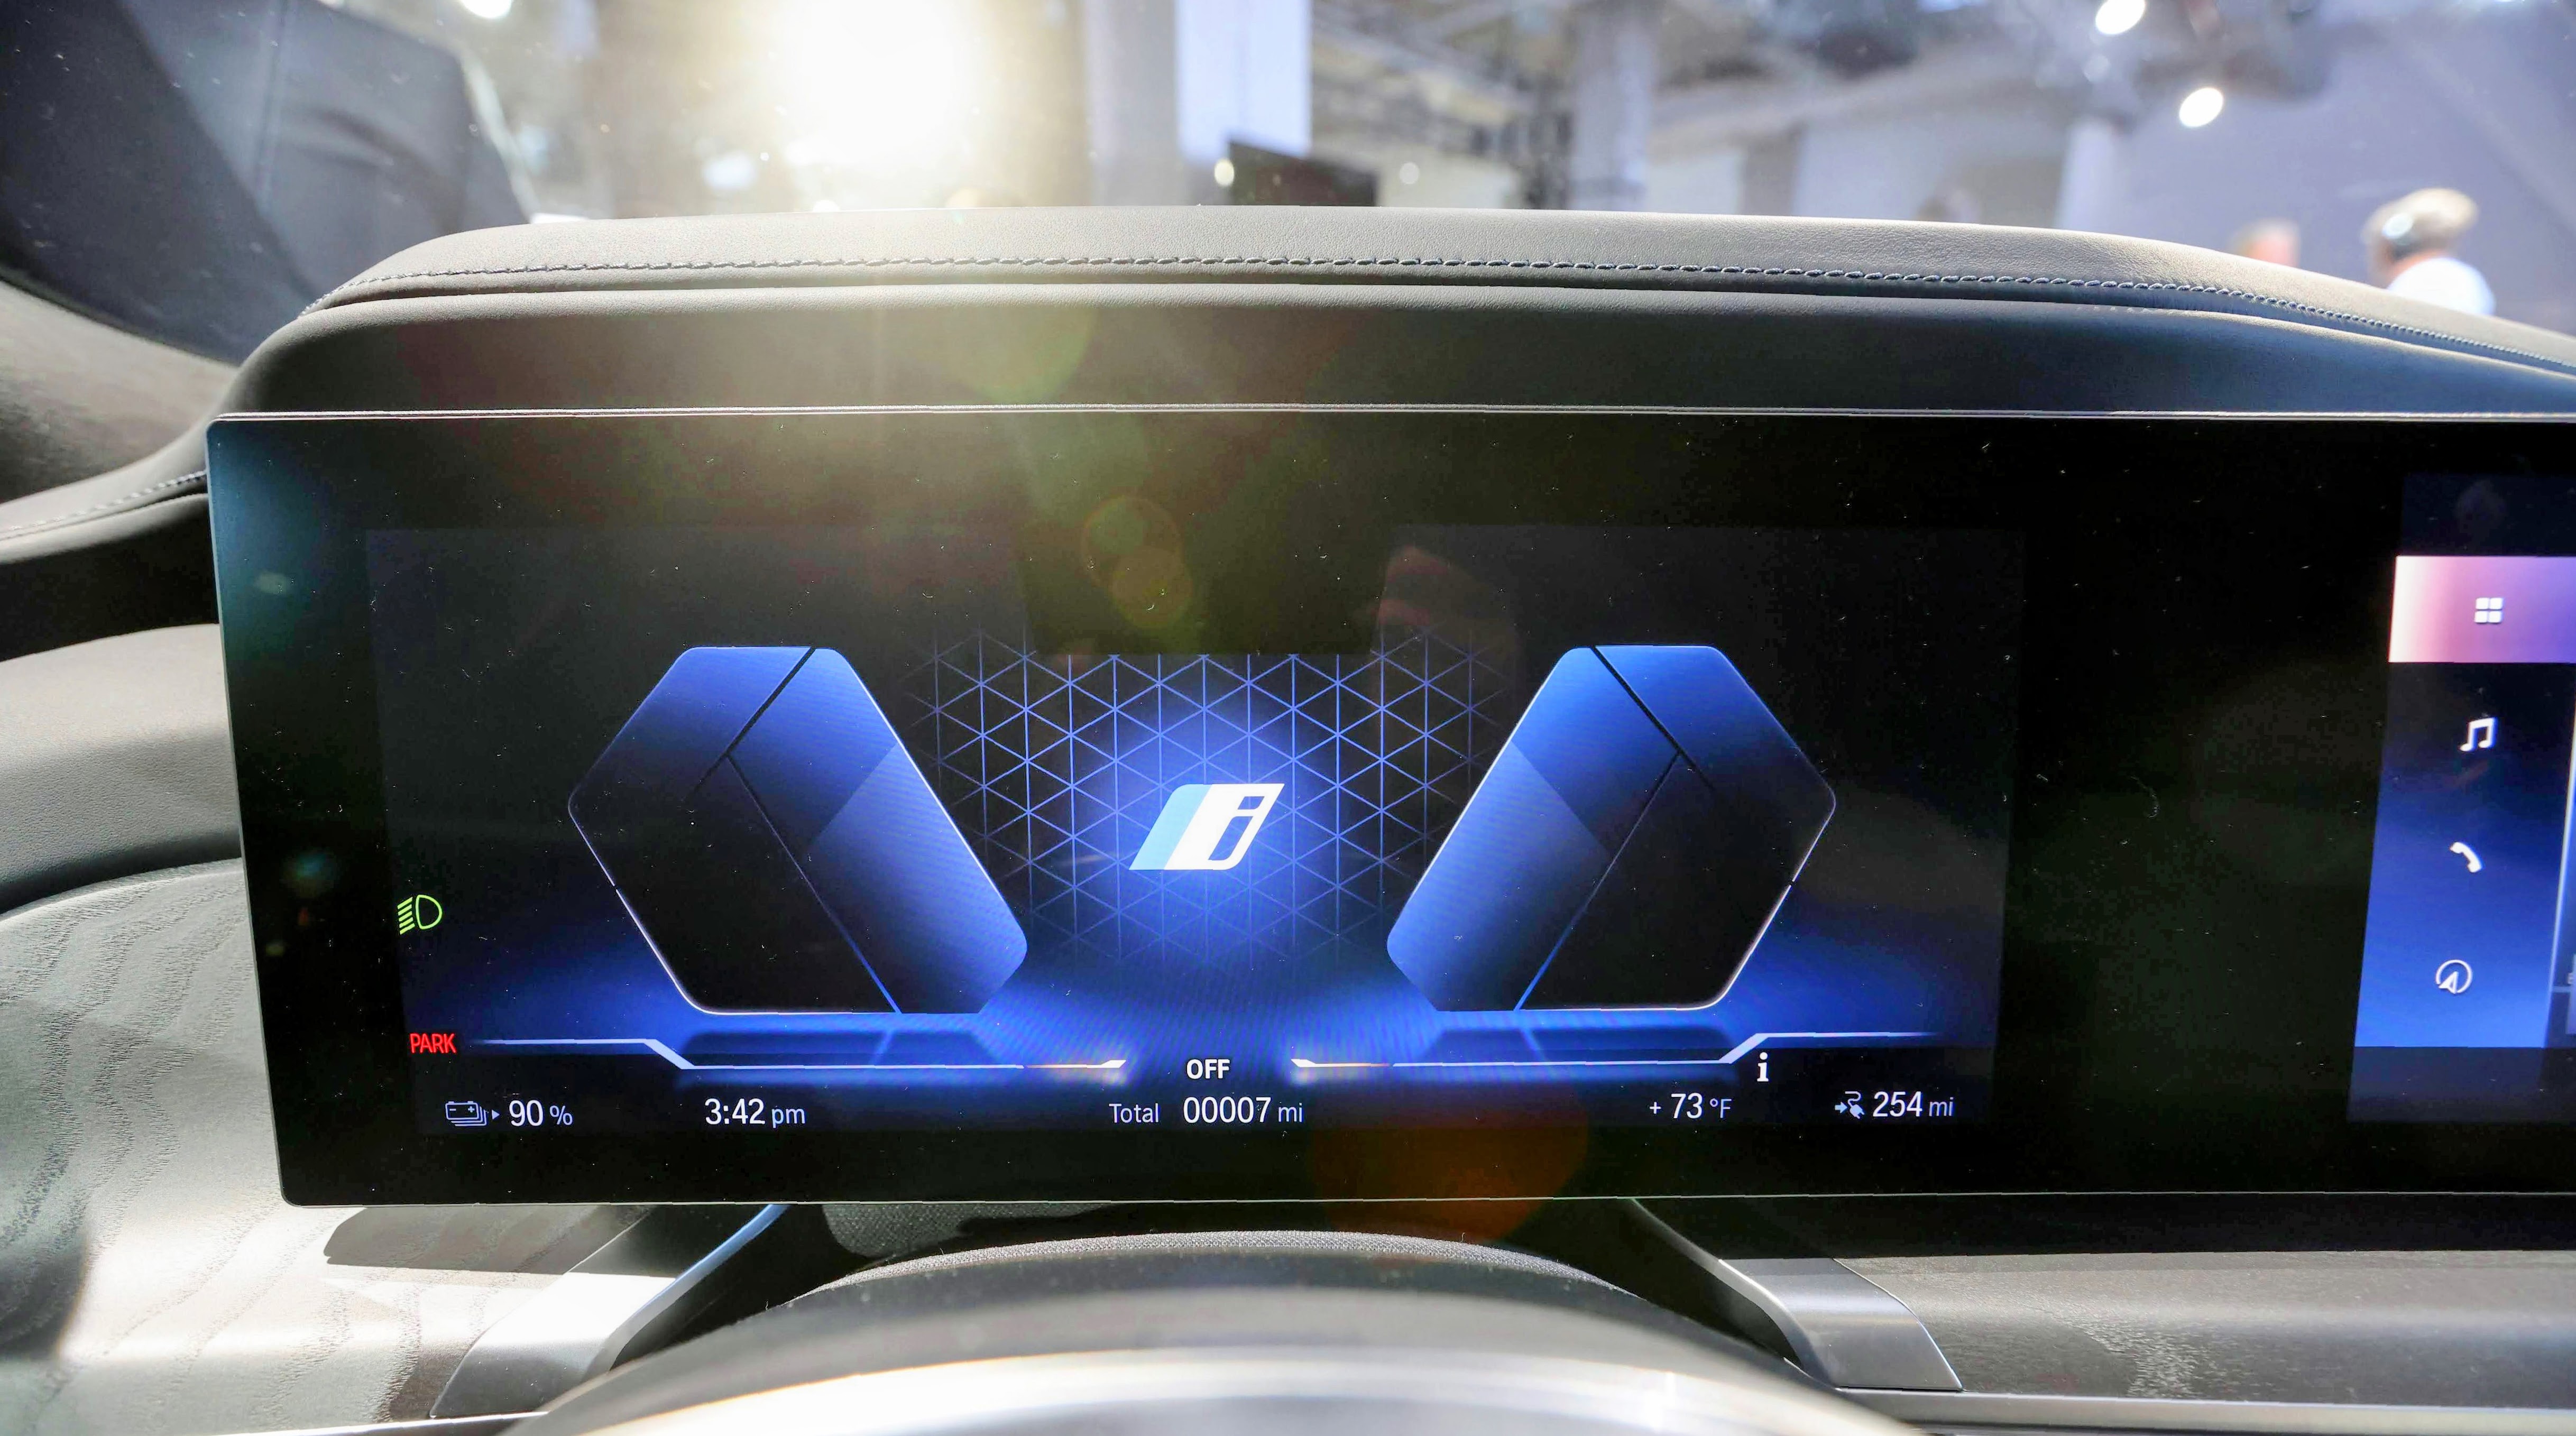 Close-up of the cluster display behind the steering wheel